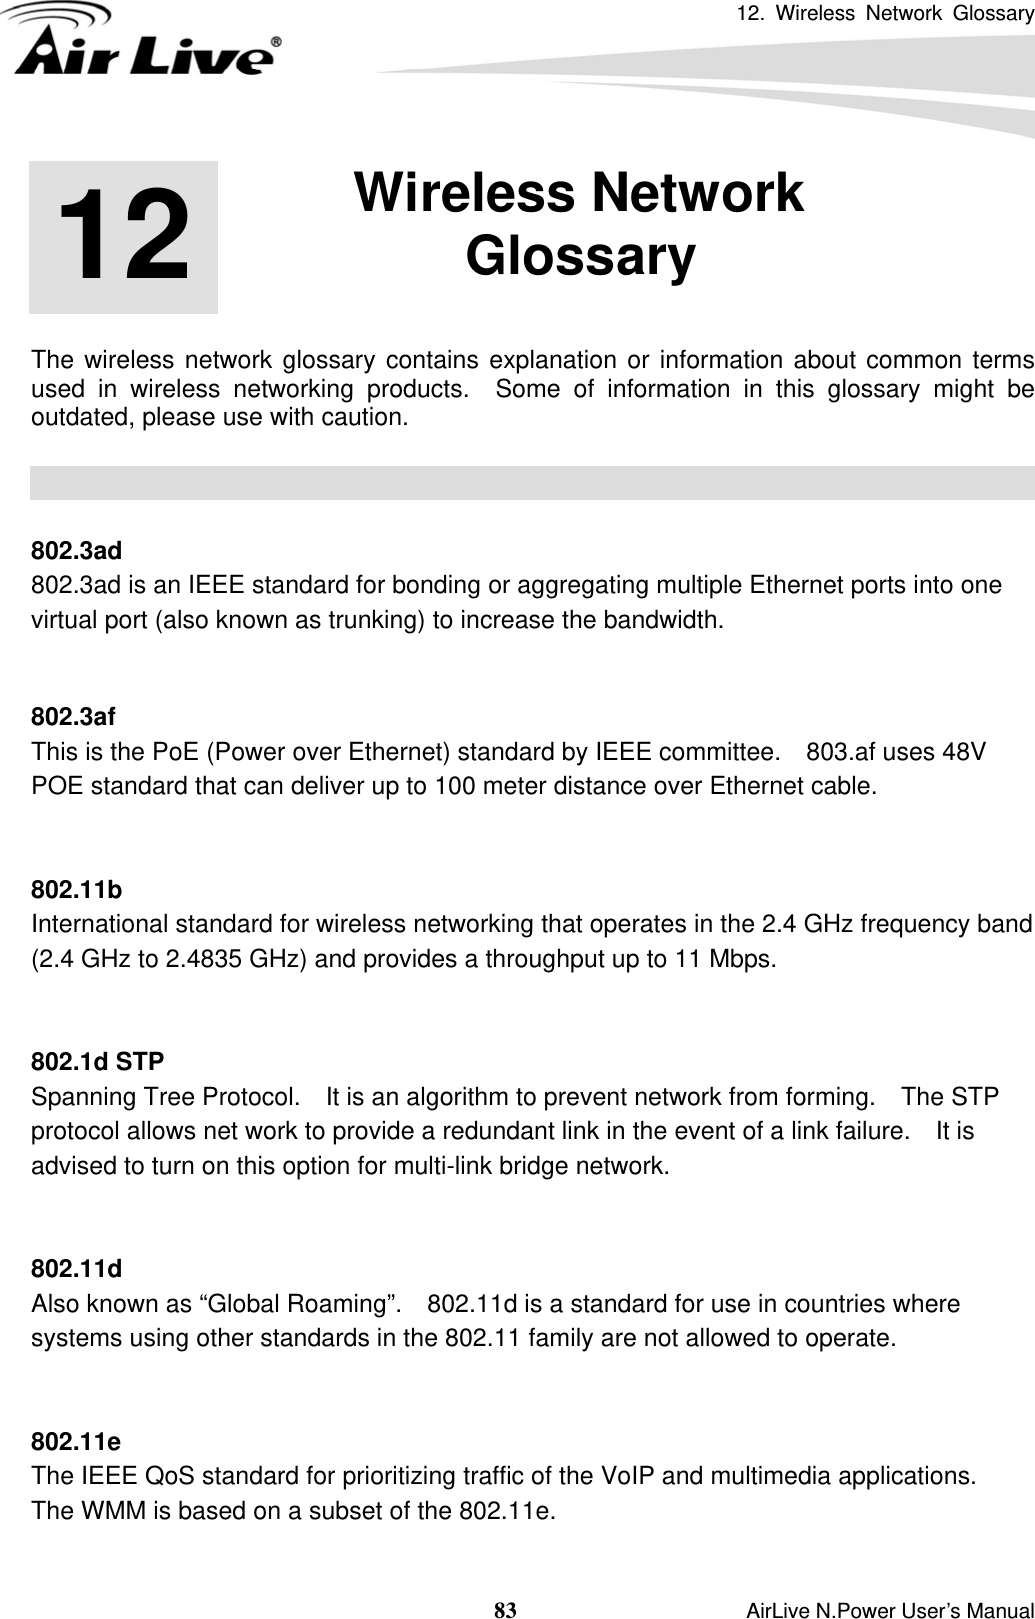 12. Wireless Network Glossary  83                    AirLive N.Power User’s Manual       The wireless network glossary contains explanation or information about common terms used in wireless networking products.  Some of information in this glossary might be outdated, please use with caution.    802.3ad 802.3ad is an IEEE standard for bonding or aggregating multiple Ethernet ports into one virtual port (also known as trunking) to increase the bandwidth.   802.3af This is the PoE (Power over Ethernet) standard by IEEE committee.  803.af uses 48V POE standard that can deliver up to 100 meter distance over Ethernet cable.   802.11b International standard for wireless networking that operates in the 2.4 GHz frequency band (2.4 GHz to 2.4835 GHz) and provides a throughput up to 11 Mbps.     802.1d STP Spanning Tree Protocol.    It is an algorithm to prevent network from forming.    The STP protocol allows net work to provide a redundant link in the event of a link failure.    It is advised to turn on this option for multi-link bridge network.   802.11d Also known as “Global Roaming”.    802.11d is a standard for use in countries where systems using other standards in the 802.11 family are not allowed to operate.   802.11e The IEEE QoS standard for prioritizing traffic of the VoIP and multimedia applications.   The WMM is based on a subset of the 802.11e.  12  12. Wireless Network Glossary  